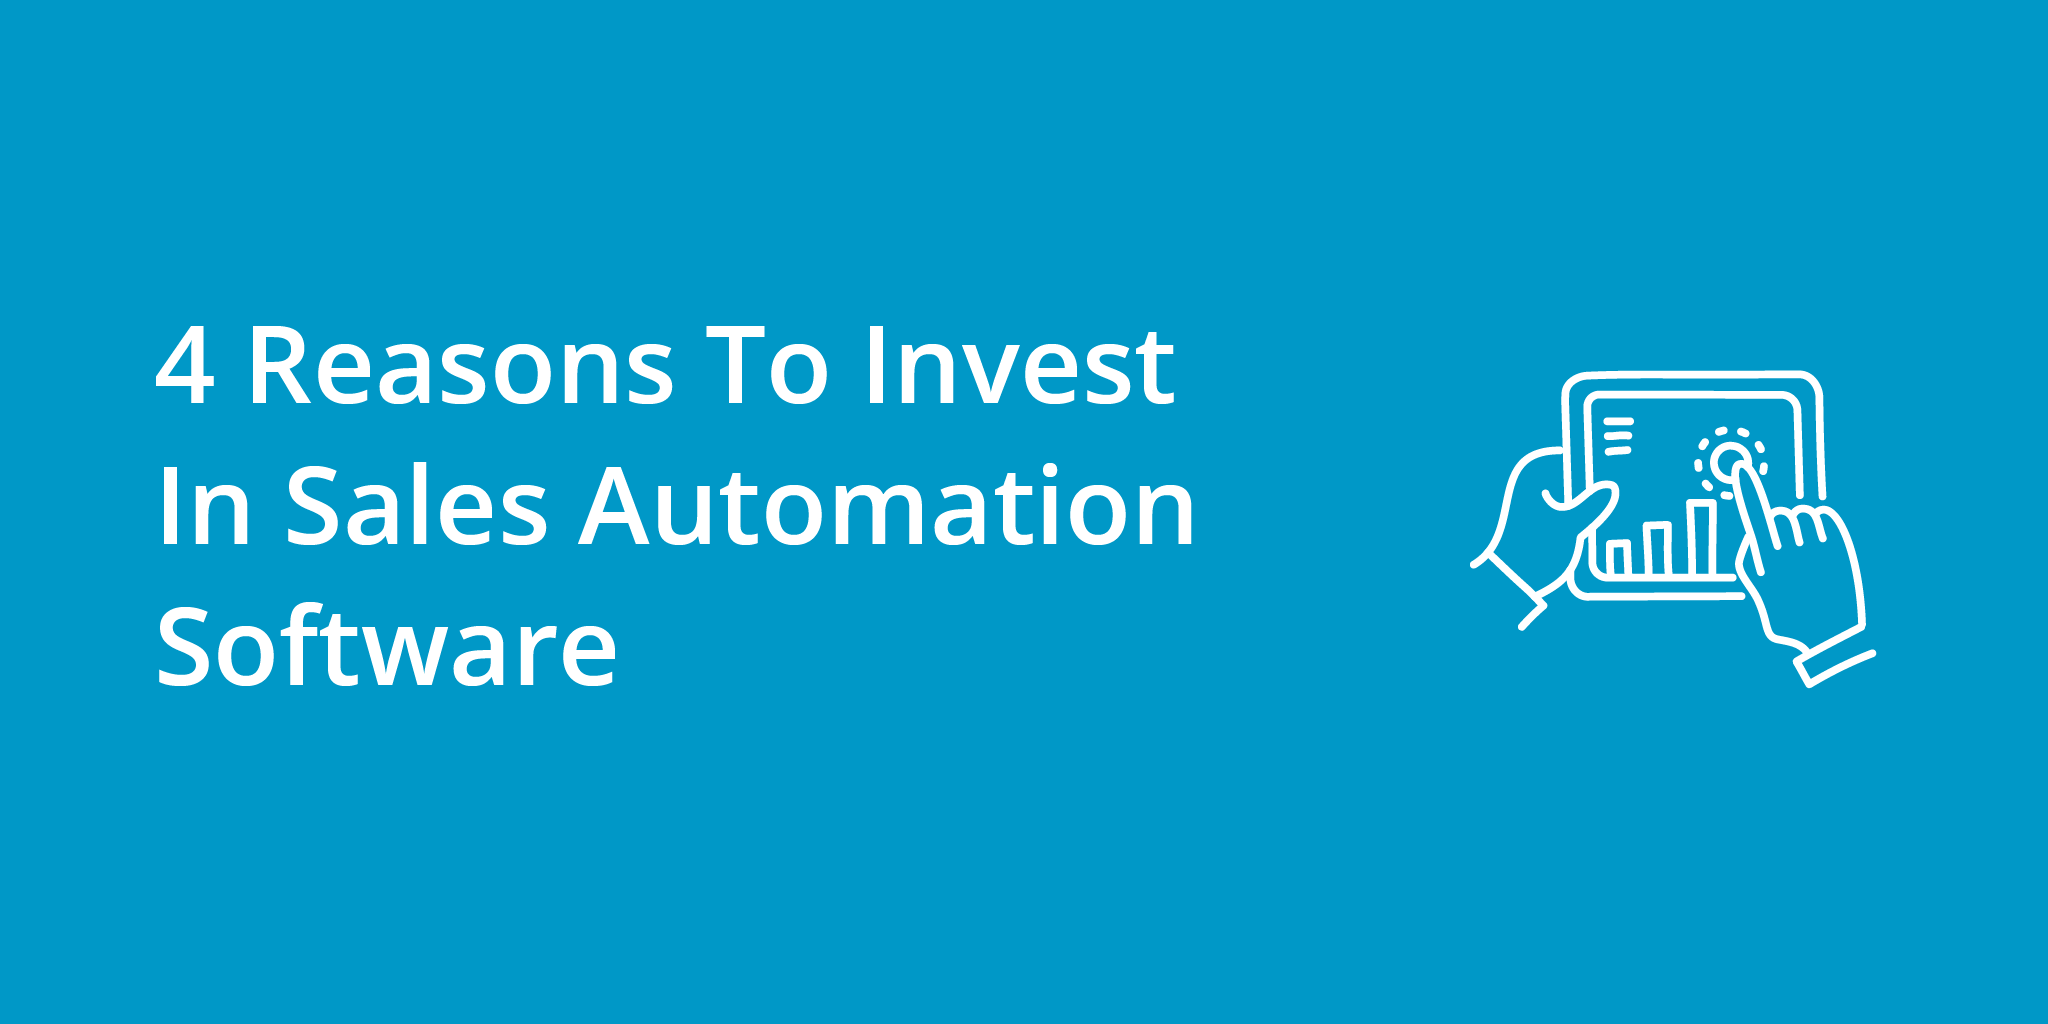 4 Reasons To Invest In Sales Automation Software